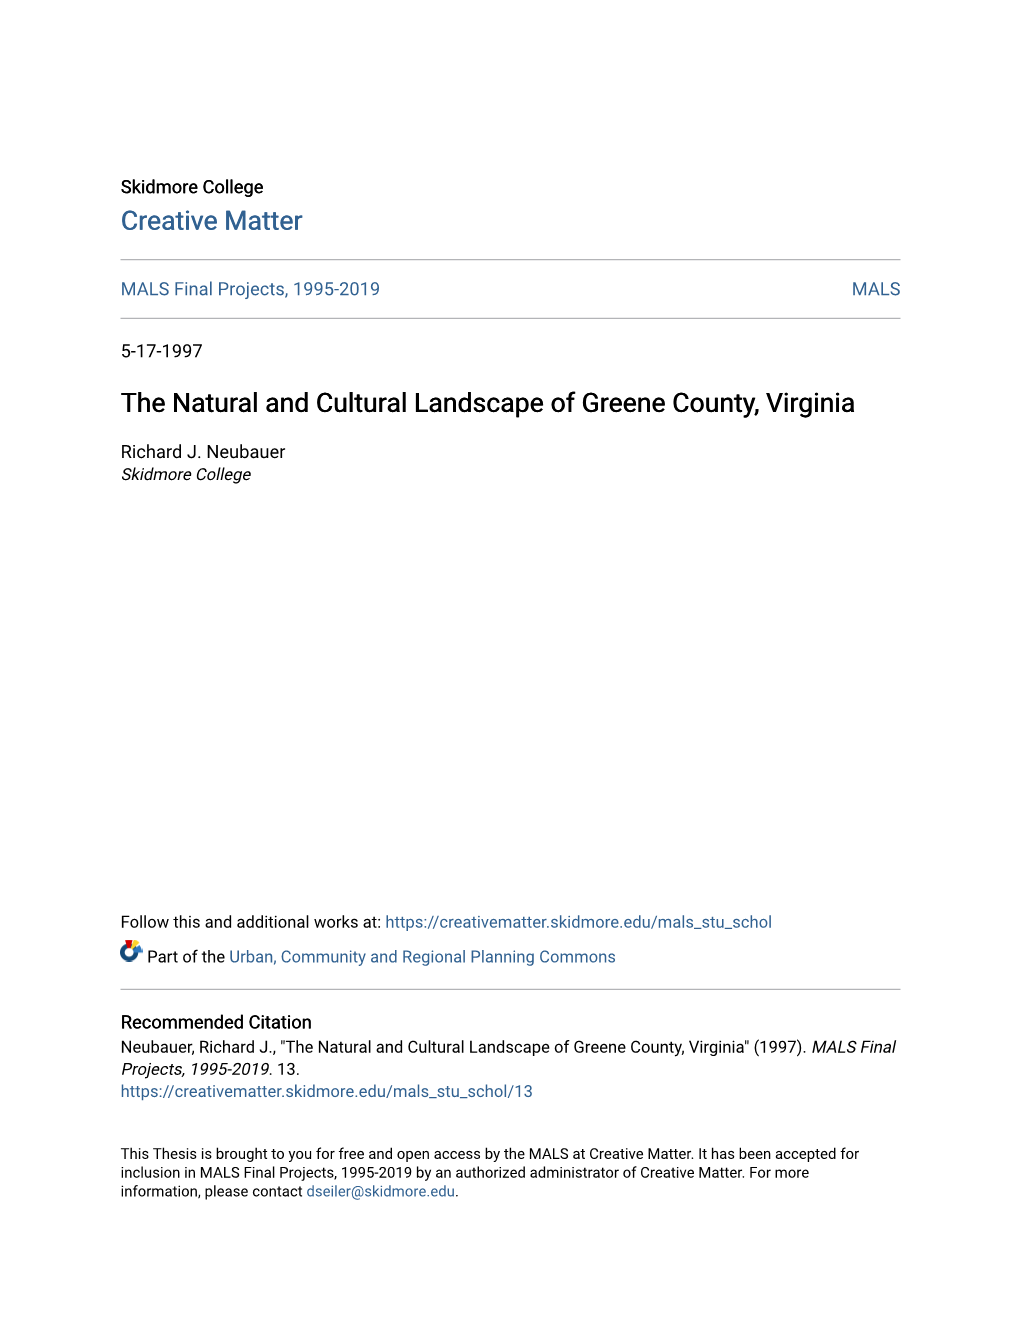 The Natural and Cultural Landscape of Greene County, Virginia